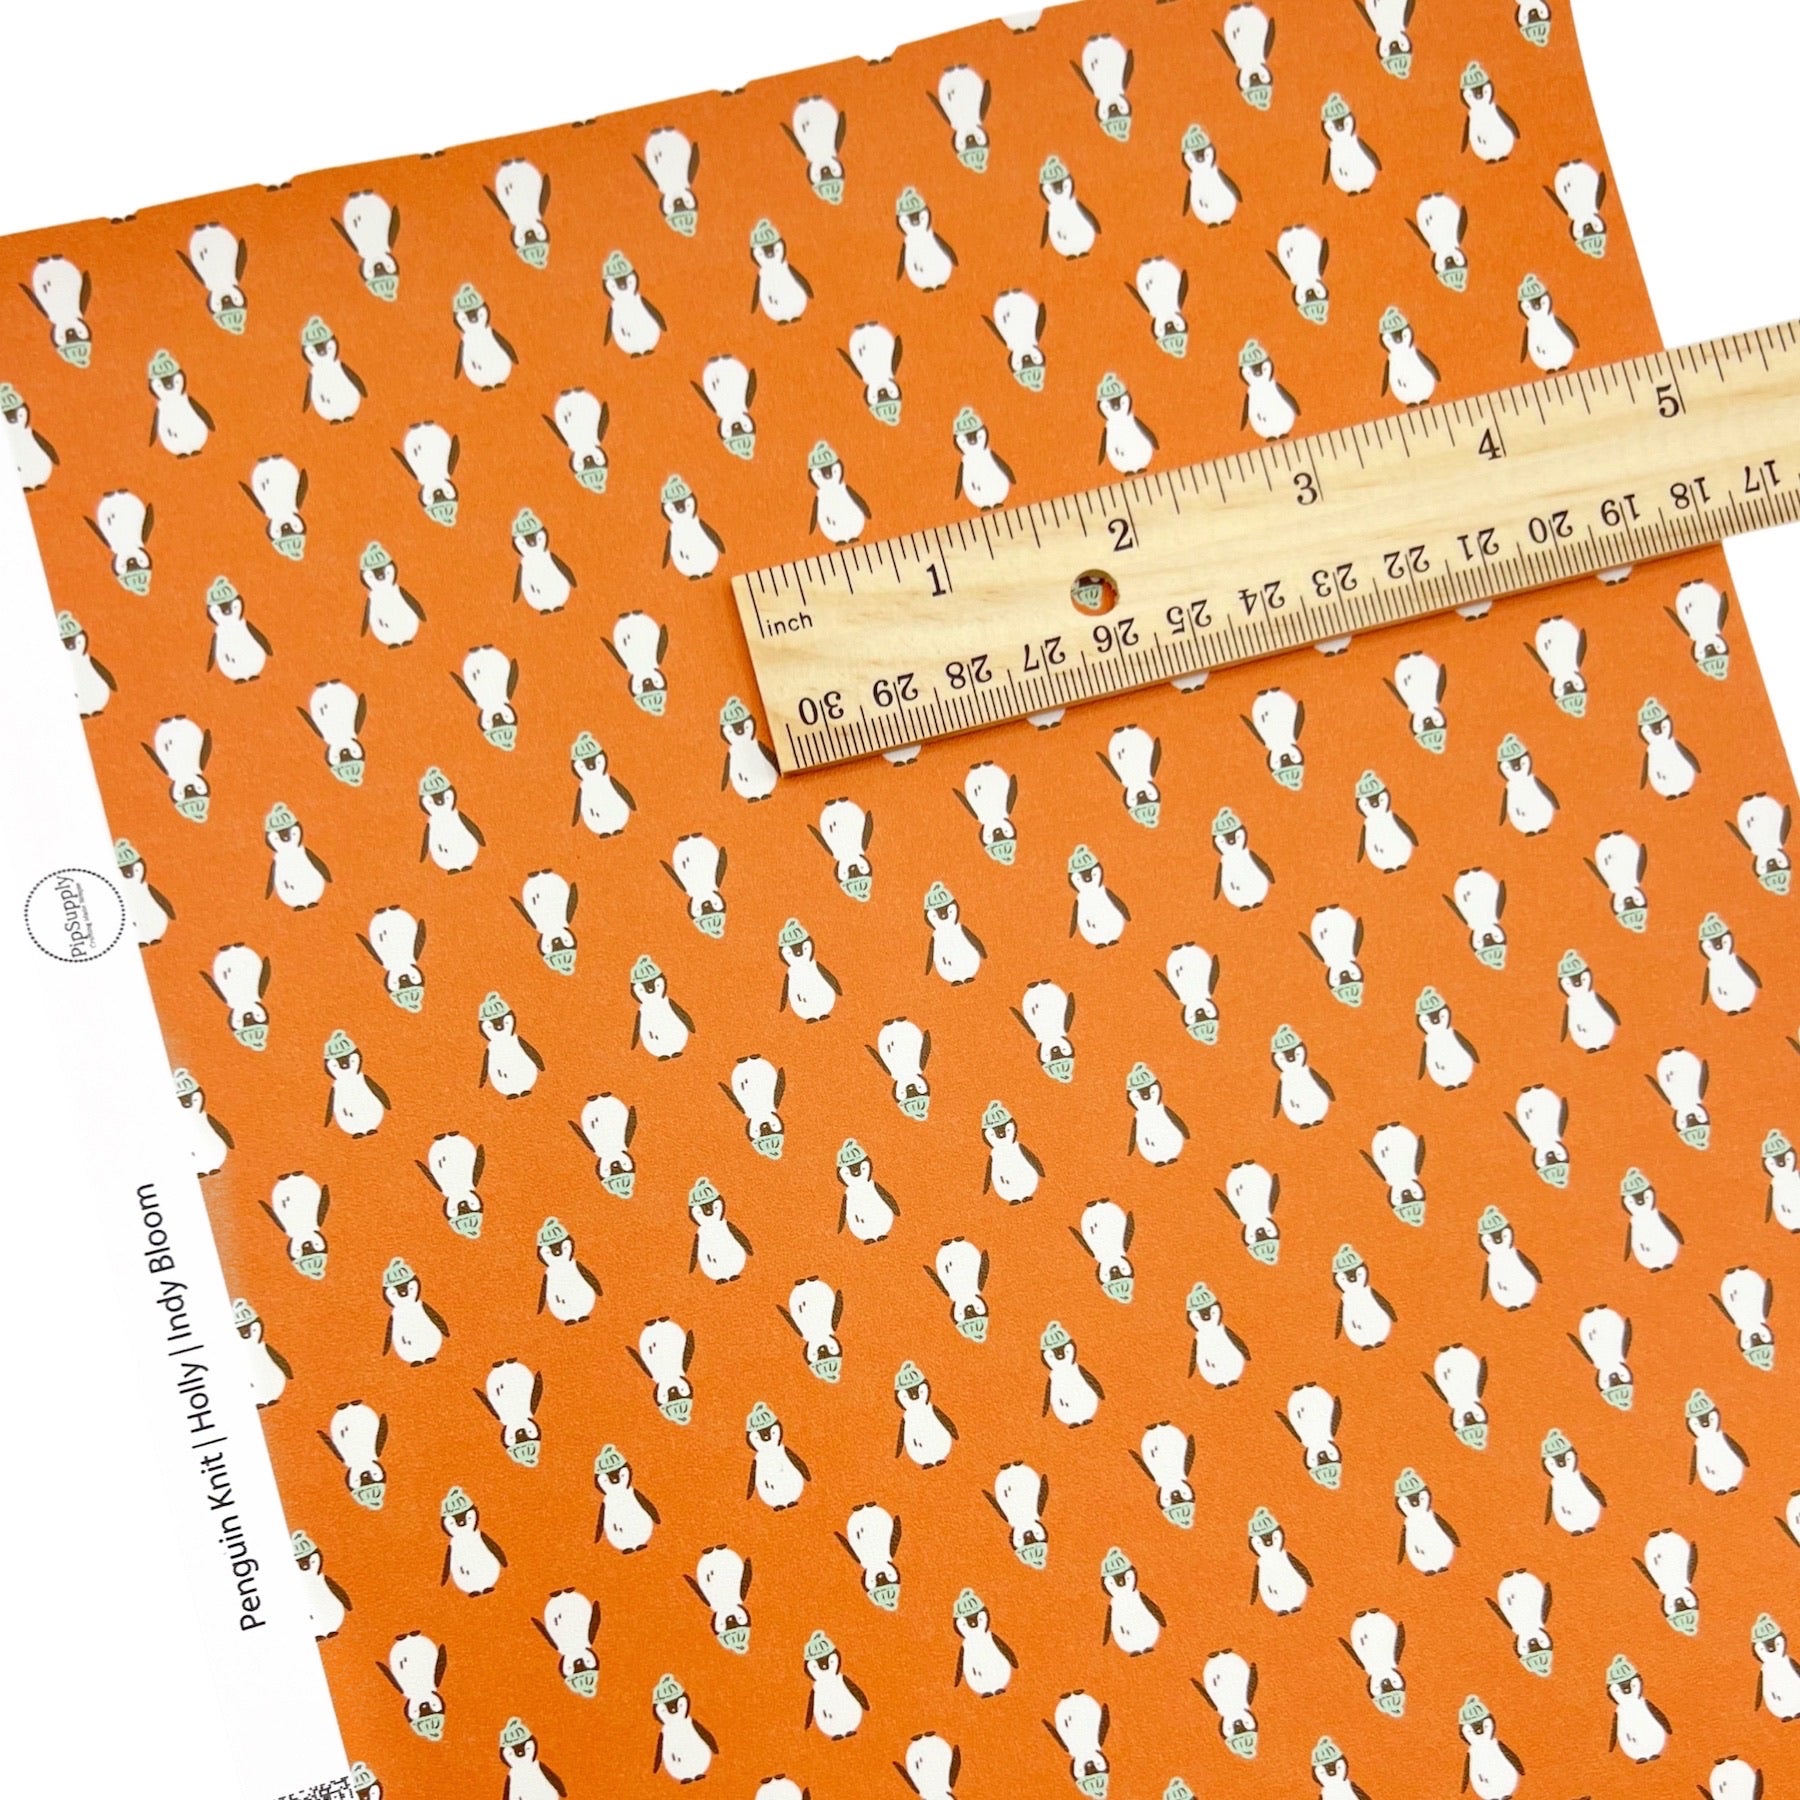 Rolled or individual christmas faux leather sheet with penguins on an orange background